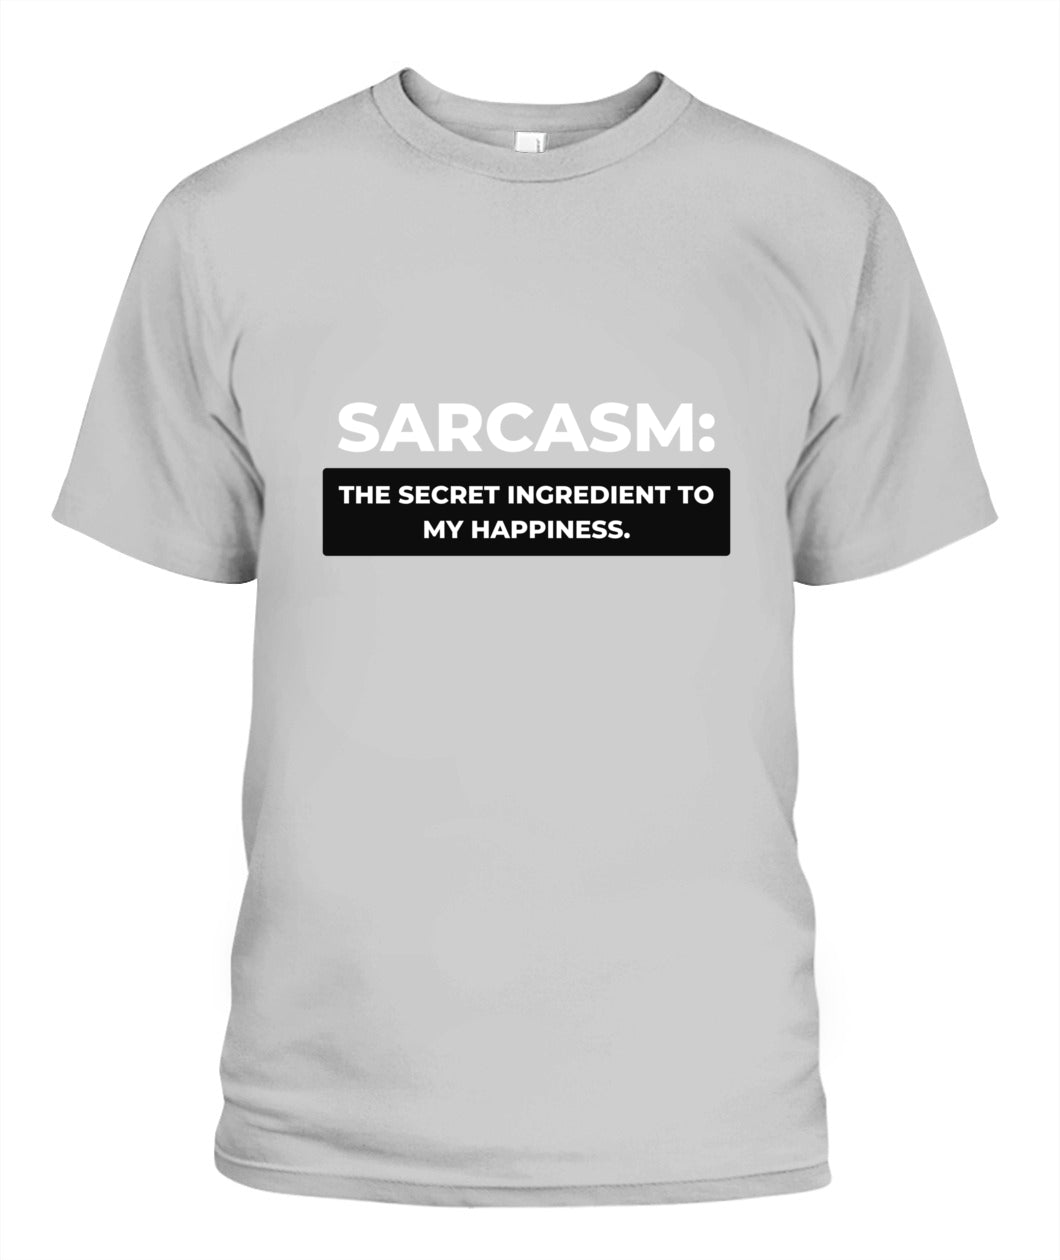 T-Shirt: Sarcasm: The Secret Ingredient to My Happiness (White Text)